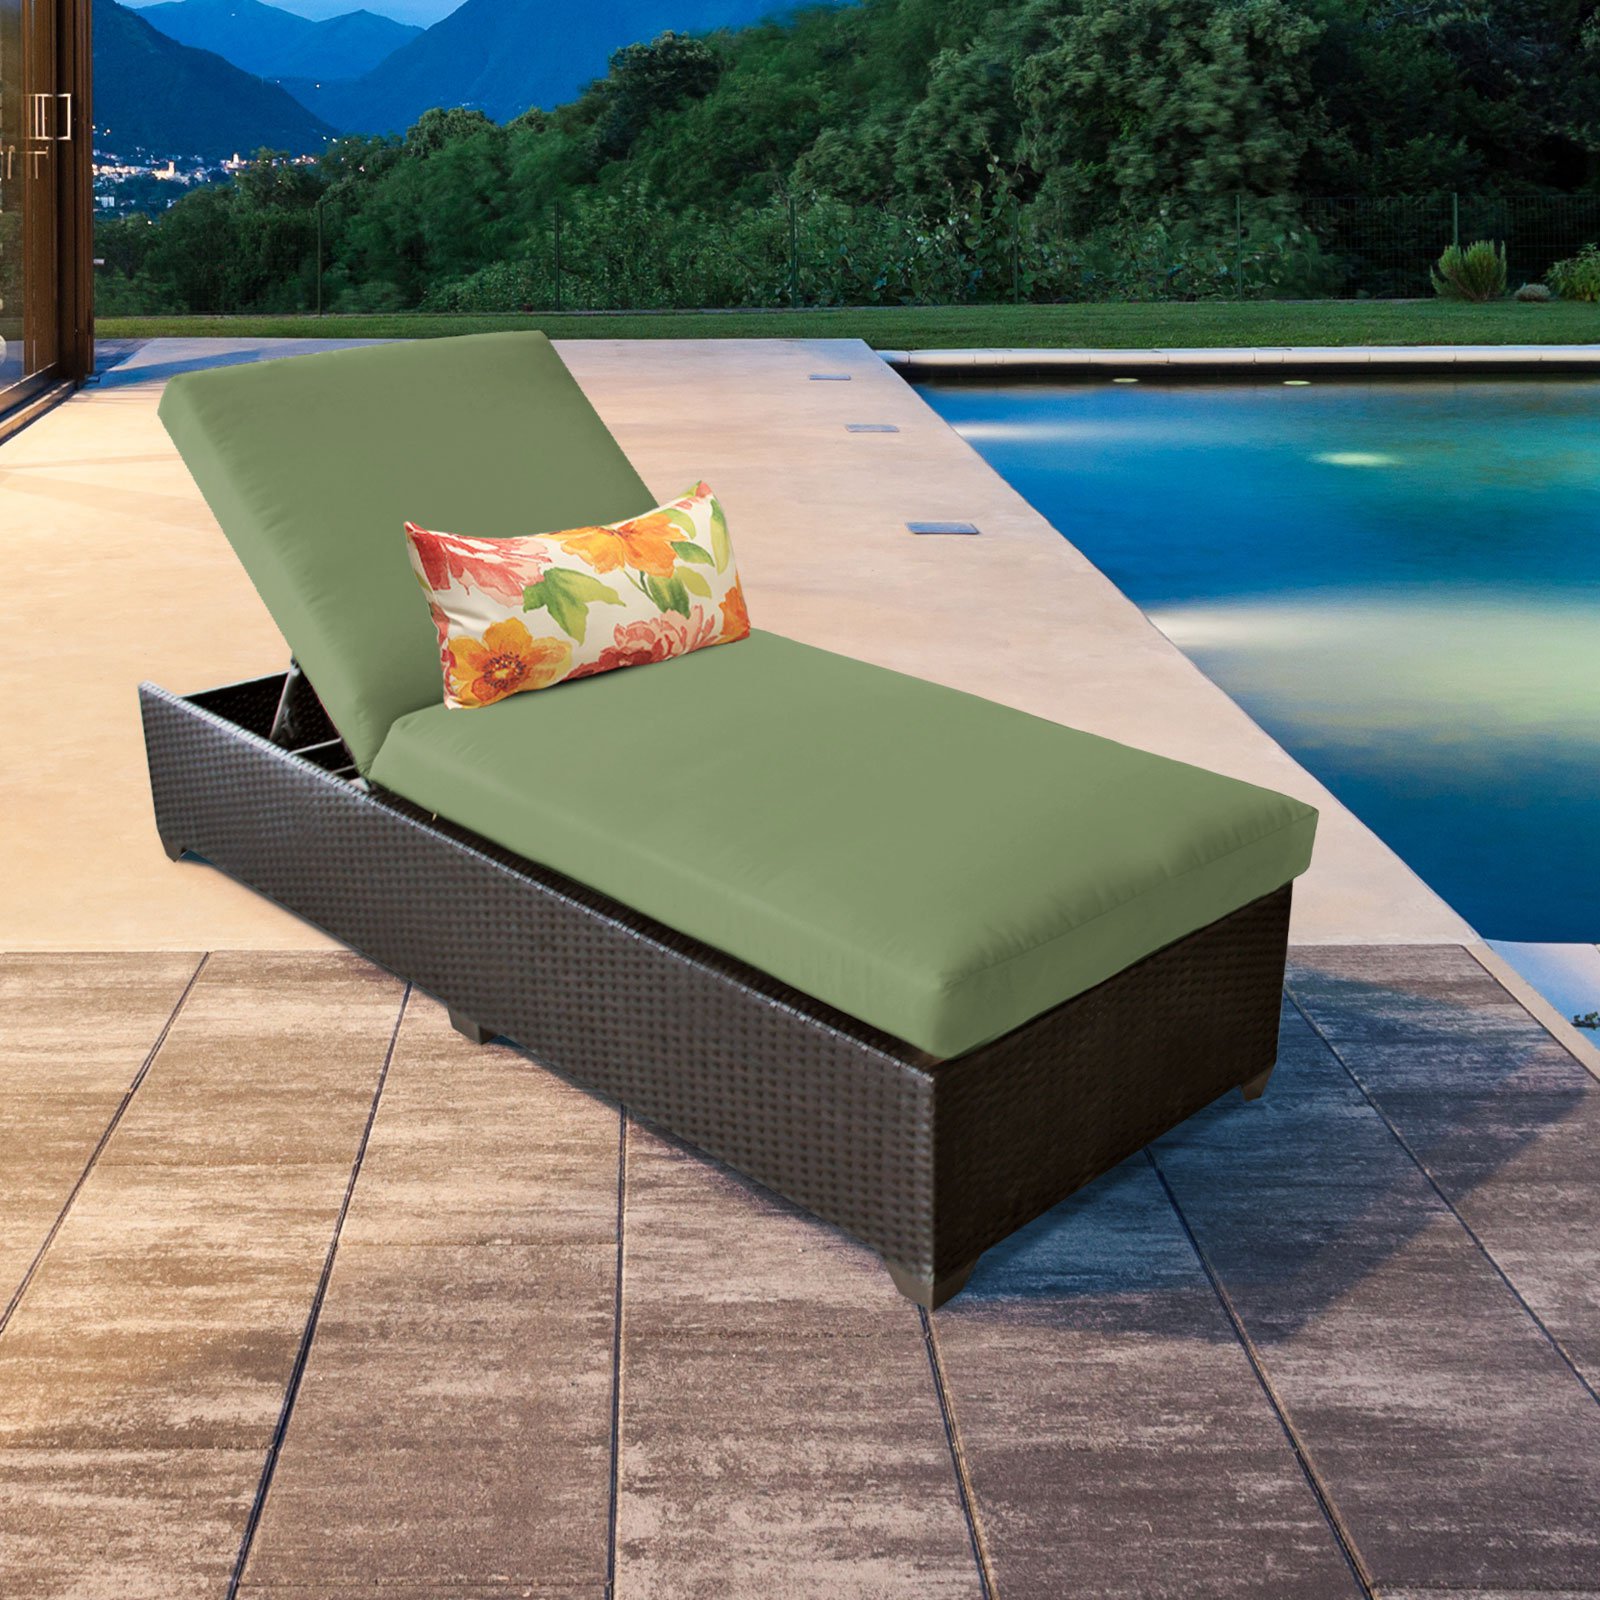 TK Classics Barbados Wicker Patio Chaise Lounge with Optional Side Table - image 4 of 10